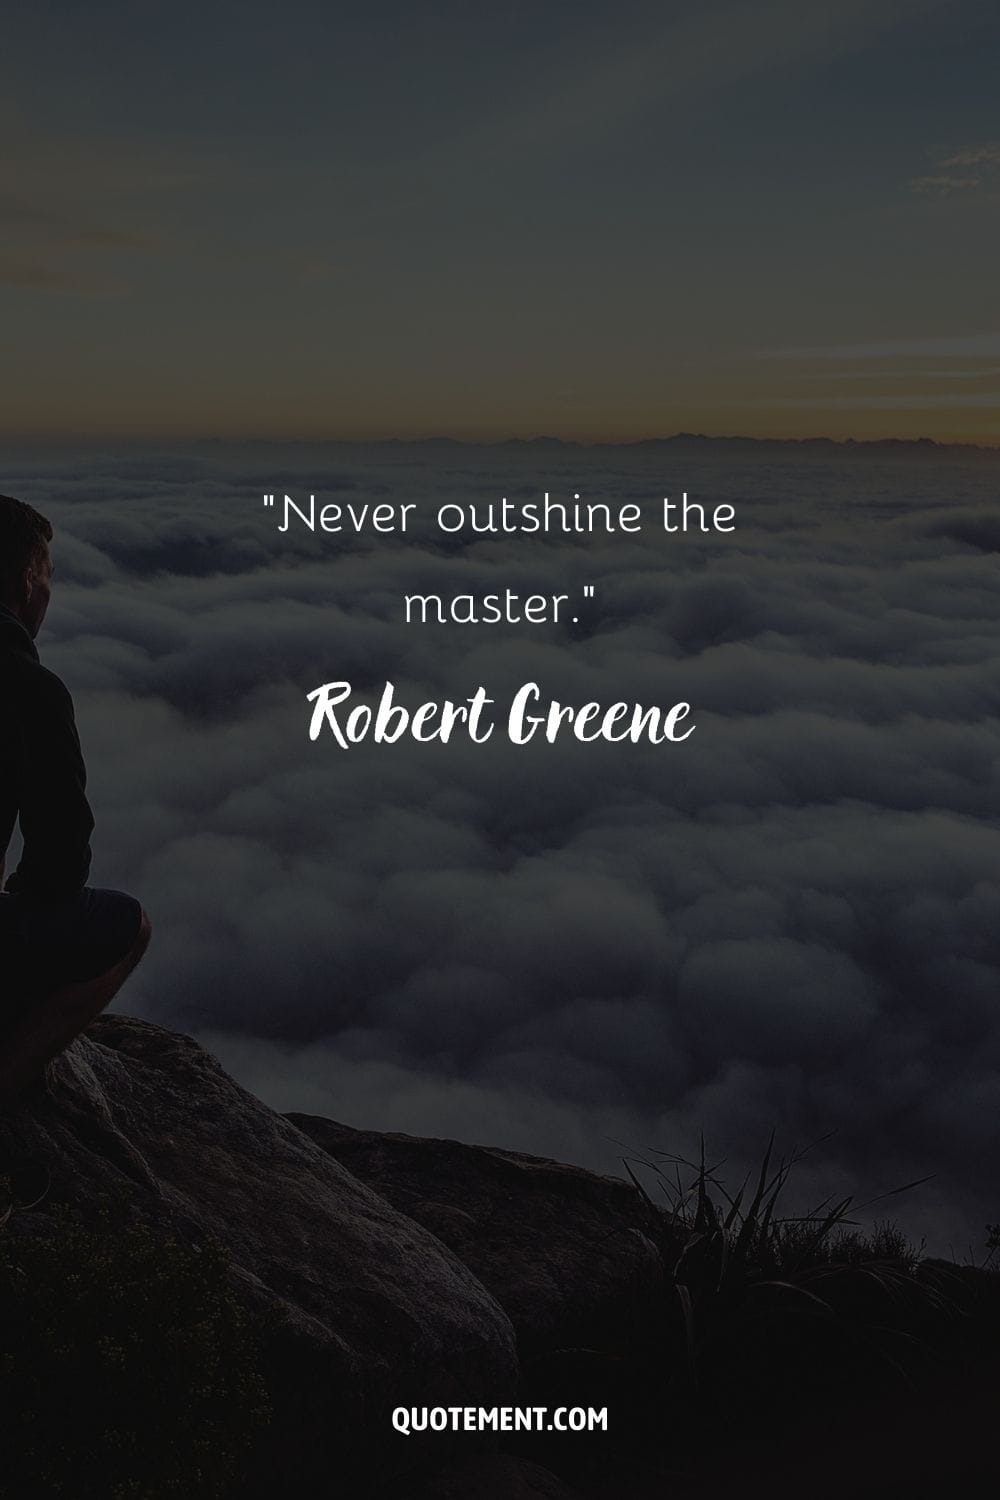 “Never outshine the master.” ― Robert Greene, The 48 Laws of Power